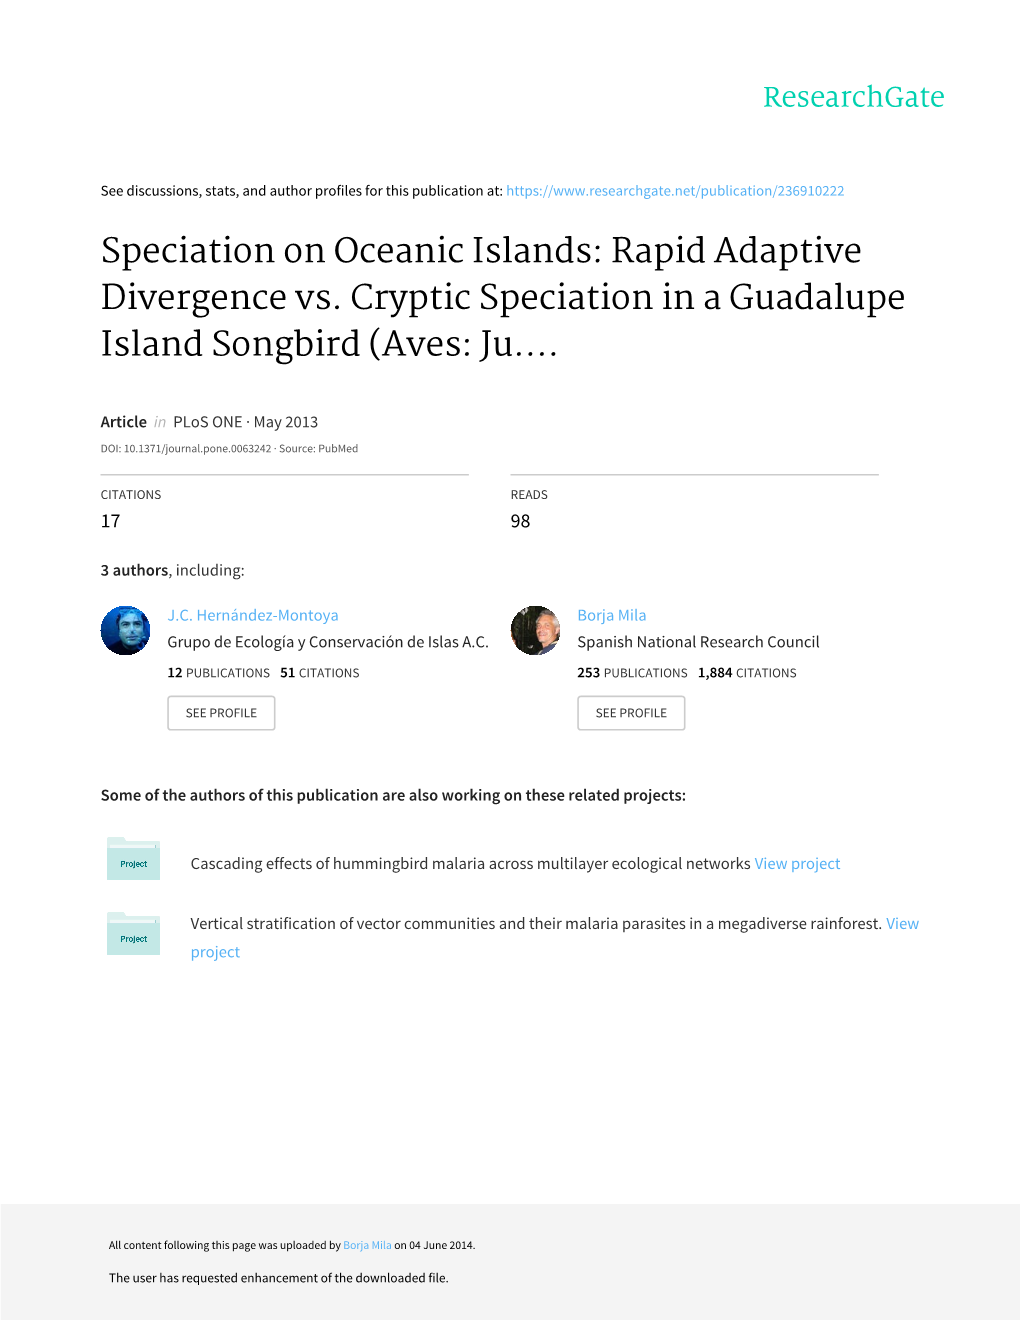 Rapid Adaptive Divergence Vs. Cryptic Speciation in a Guadalupe Island Songbird (Aves: Ju